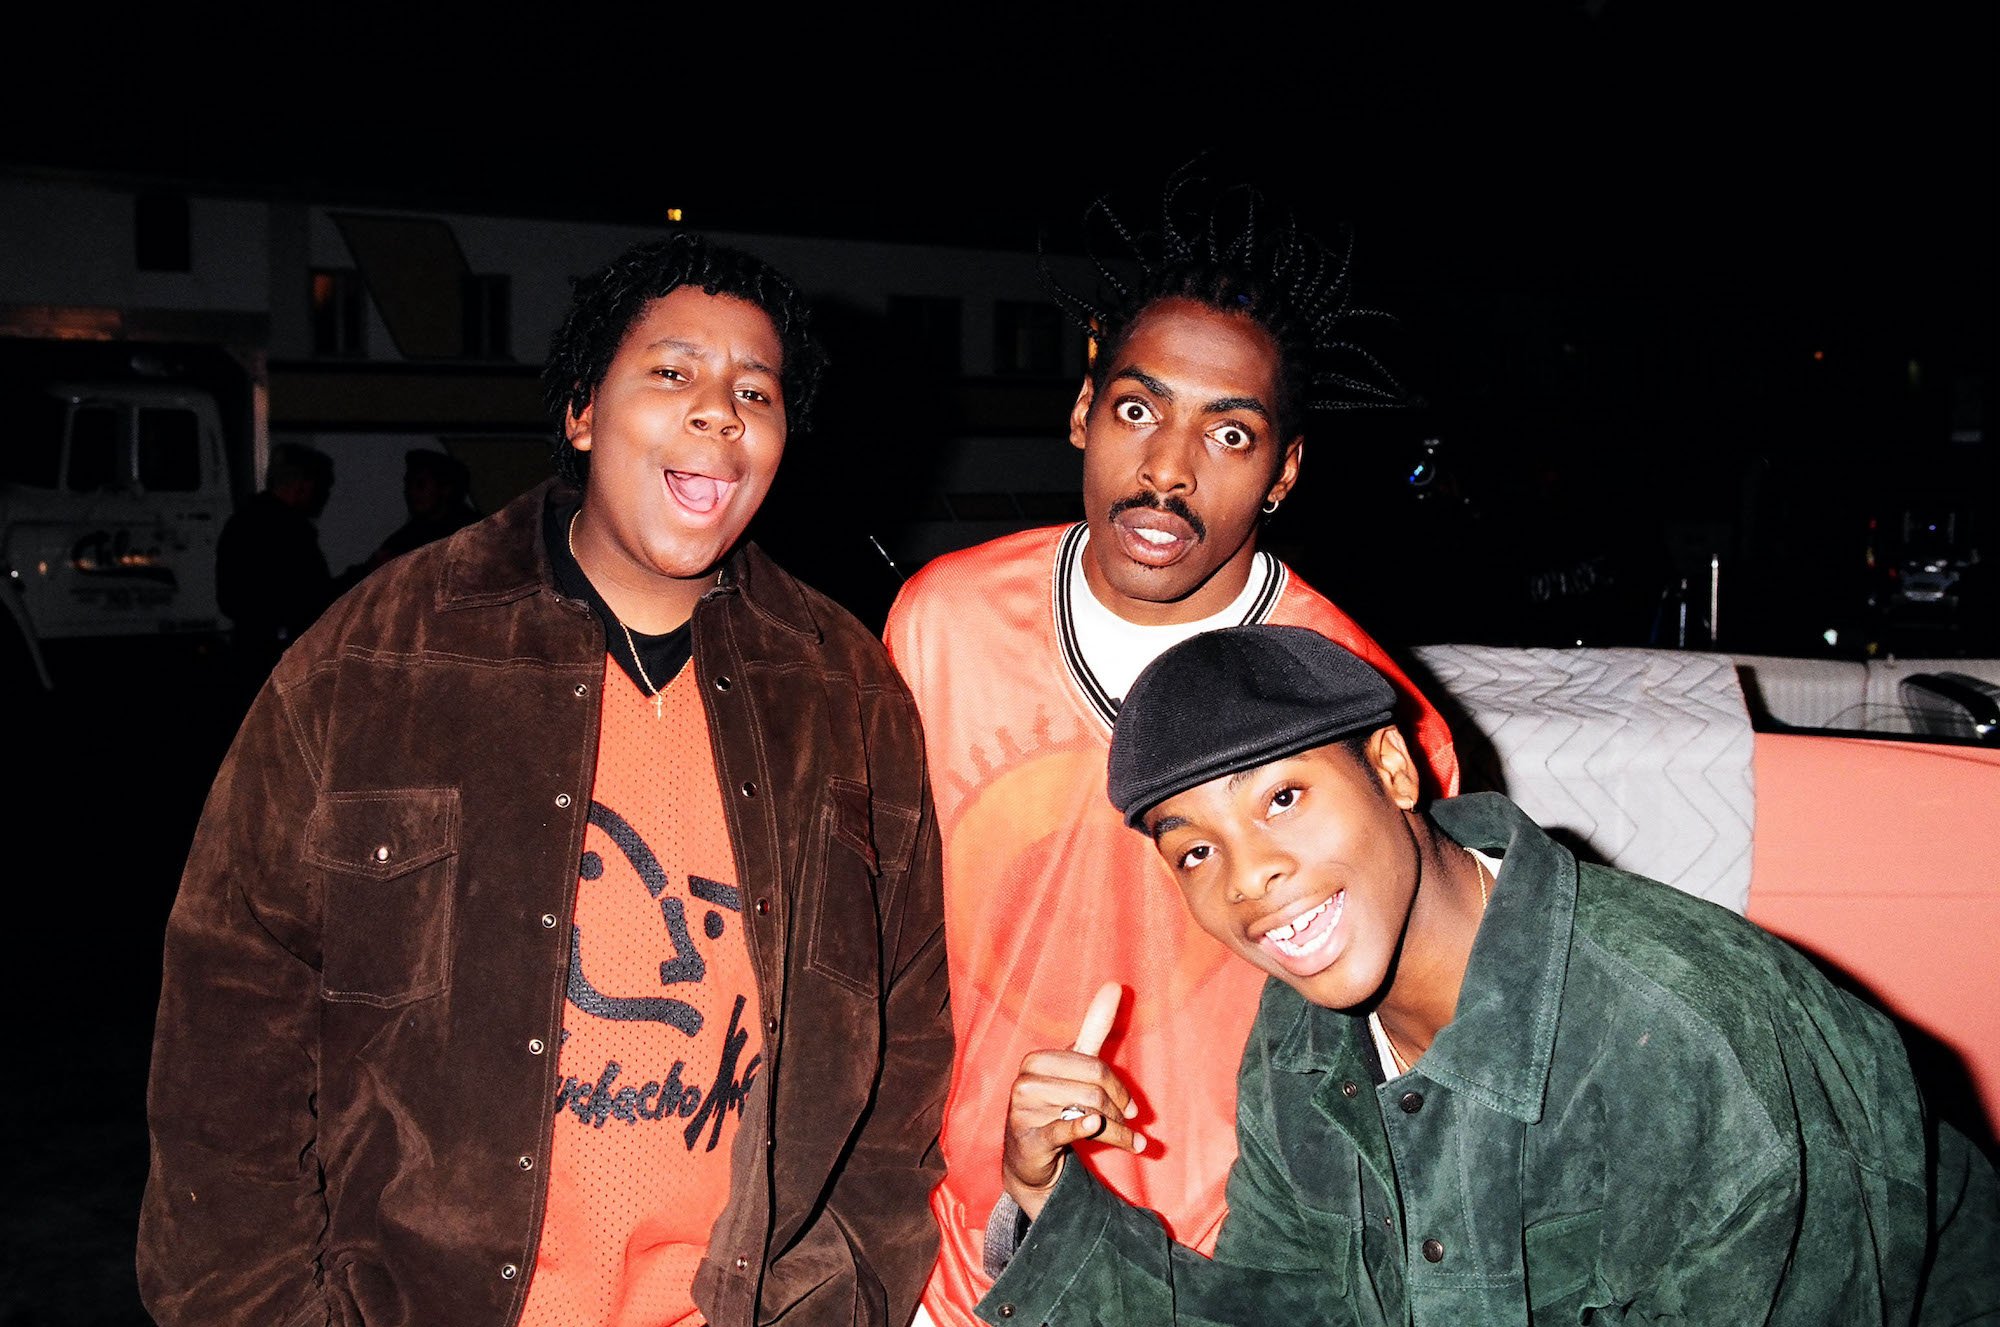 Kenan Thompson, Coolio, and Kel Mitchell photographed together